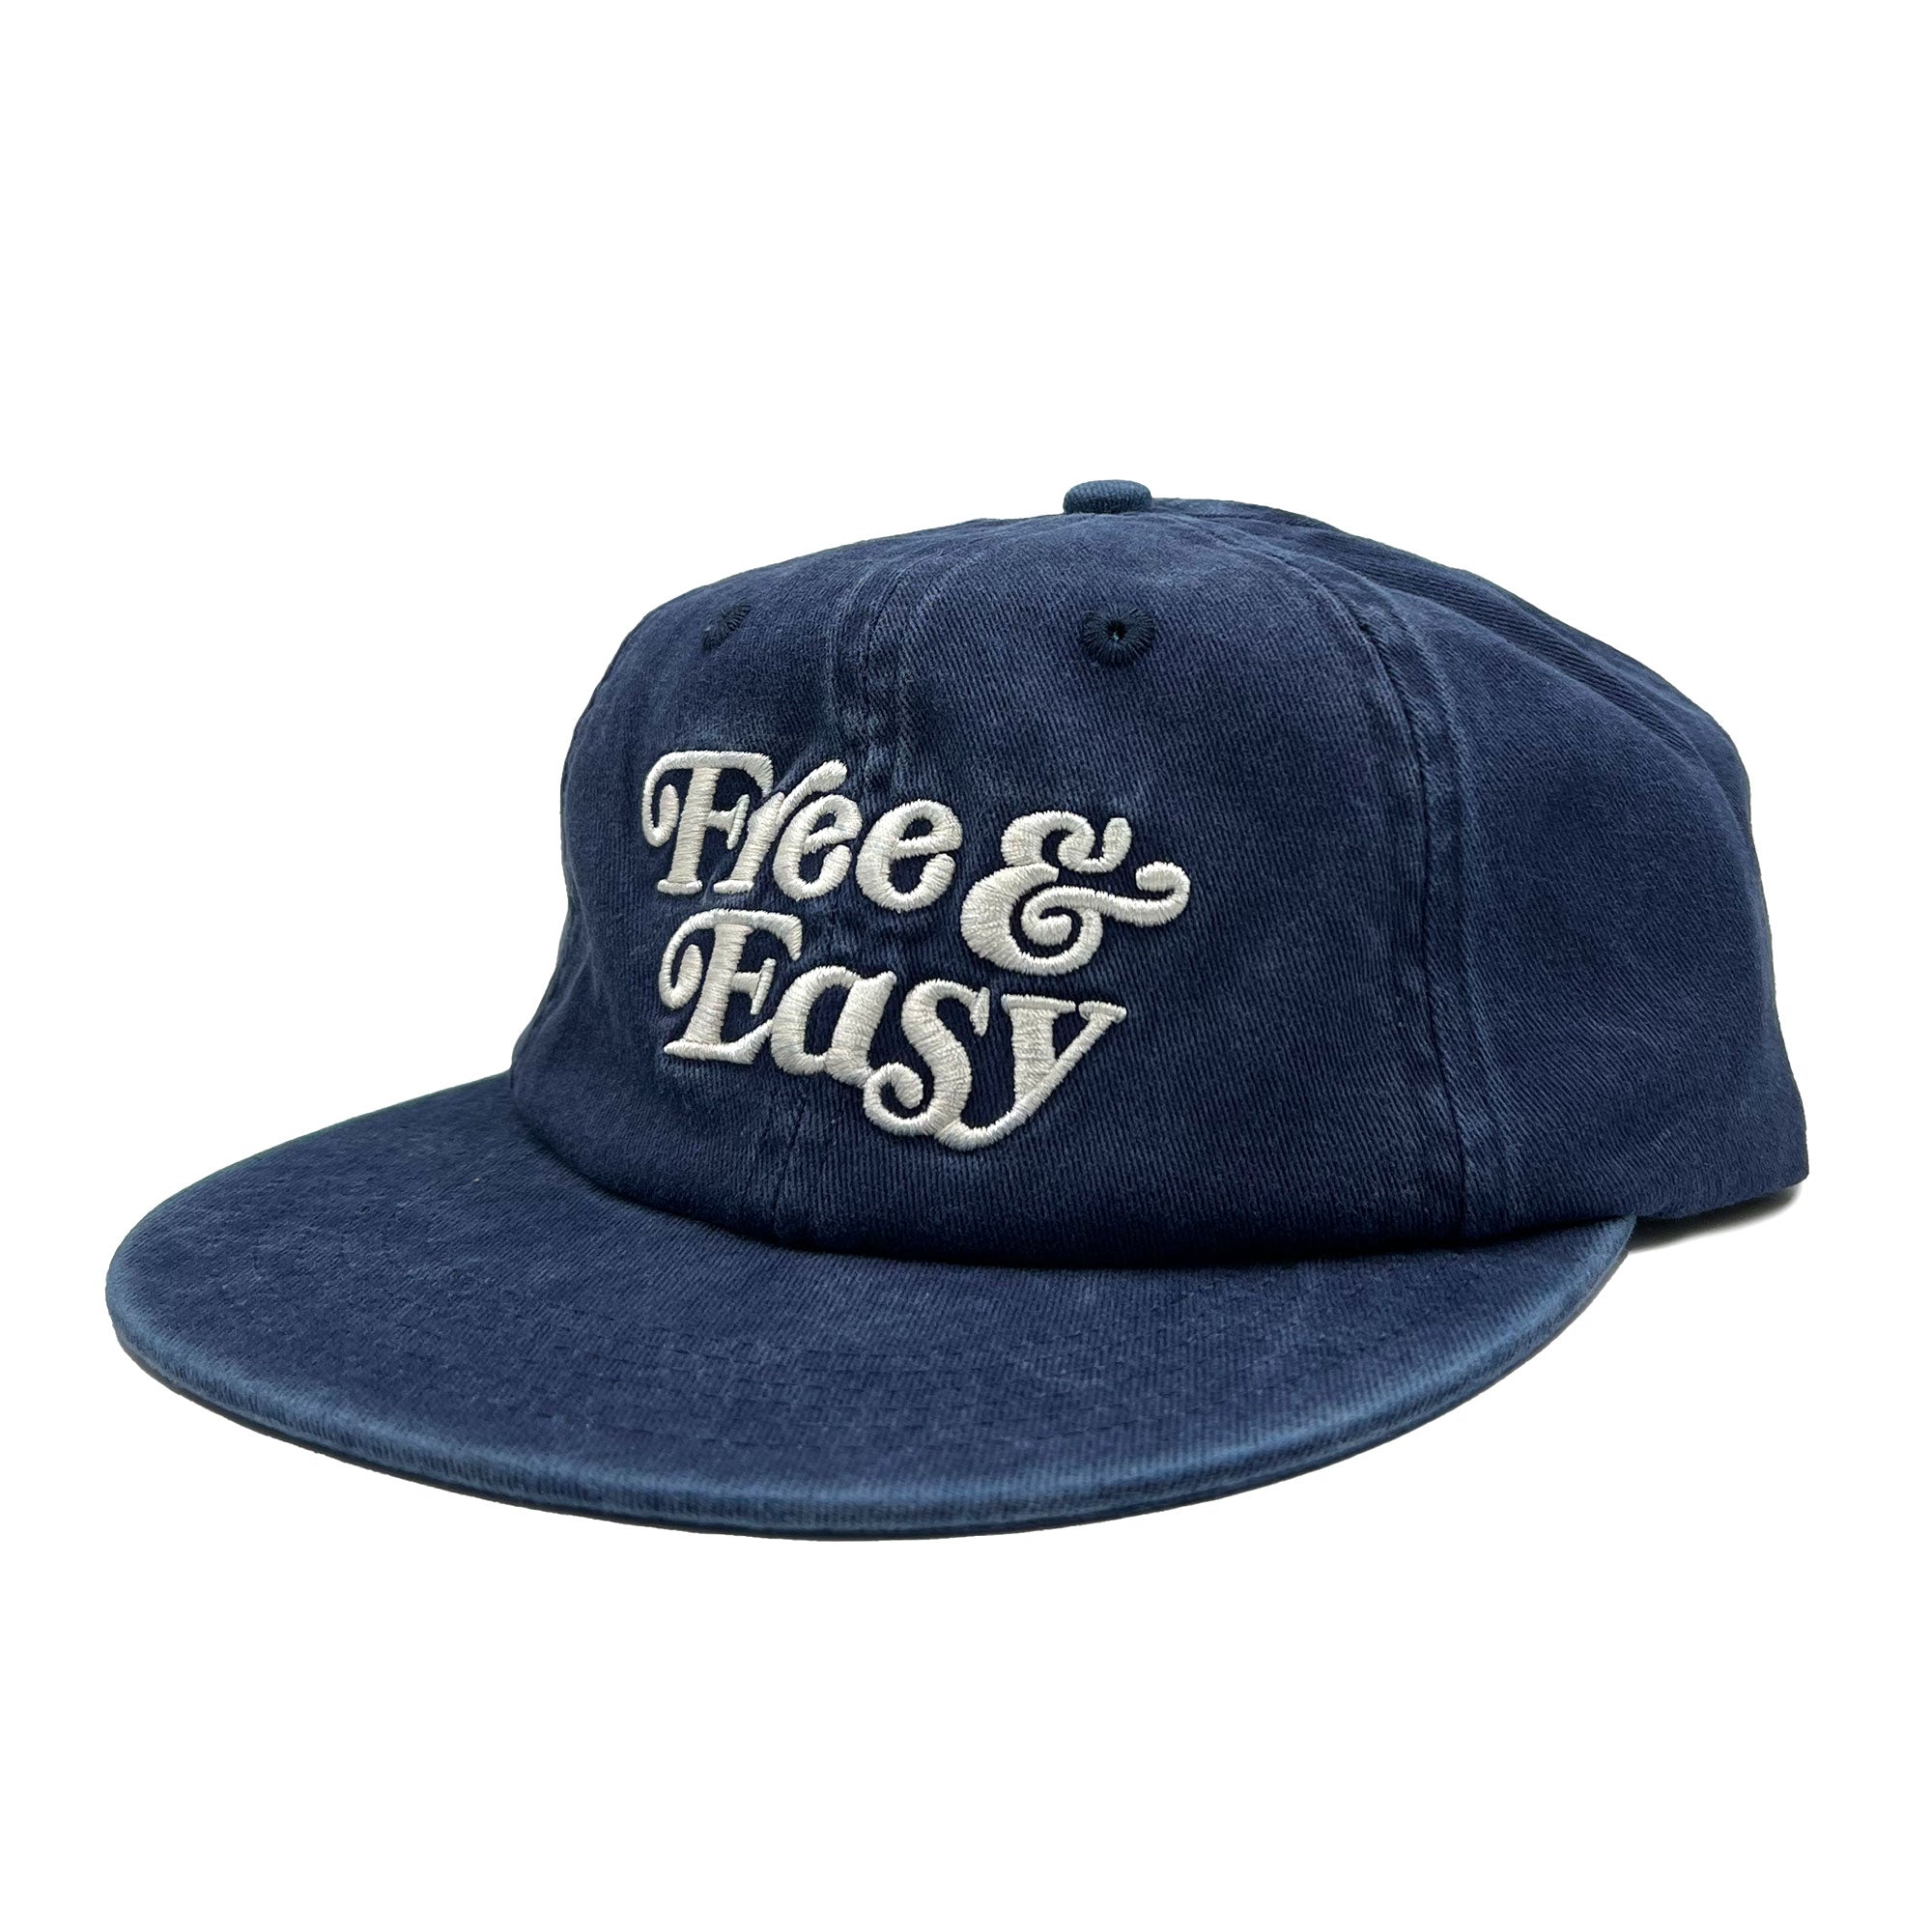 Free & Easy washed navy hat with white embroidered Don't Trip logo on white background - Free & Easy